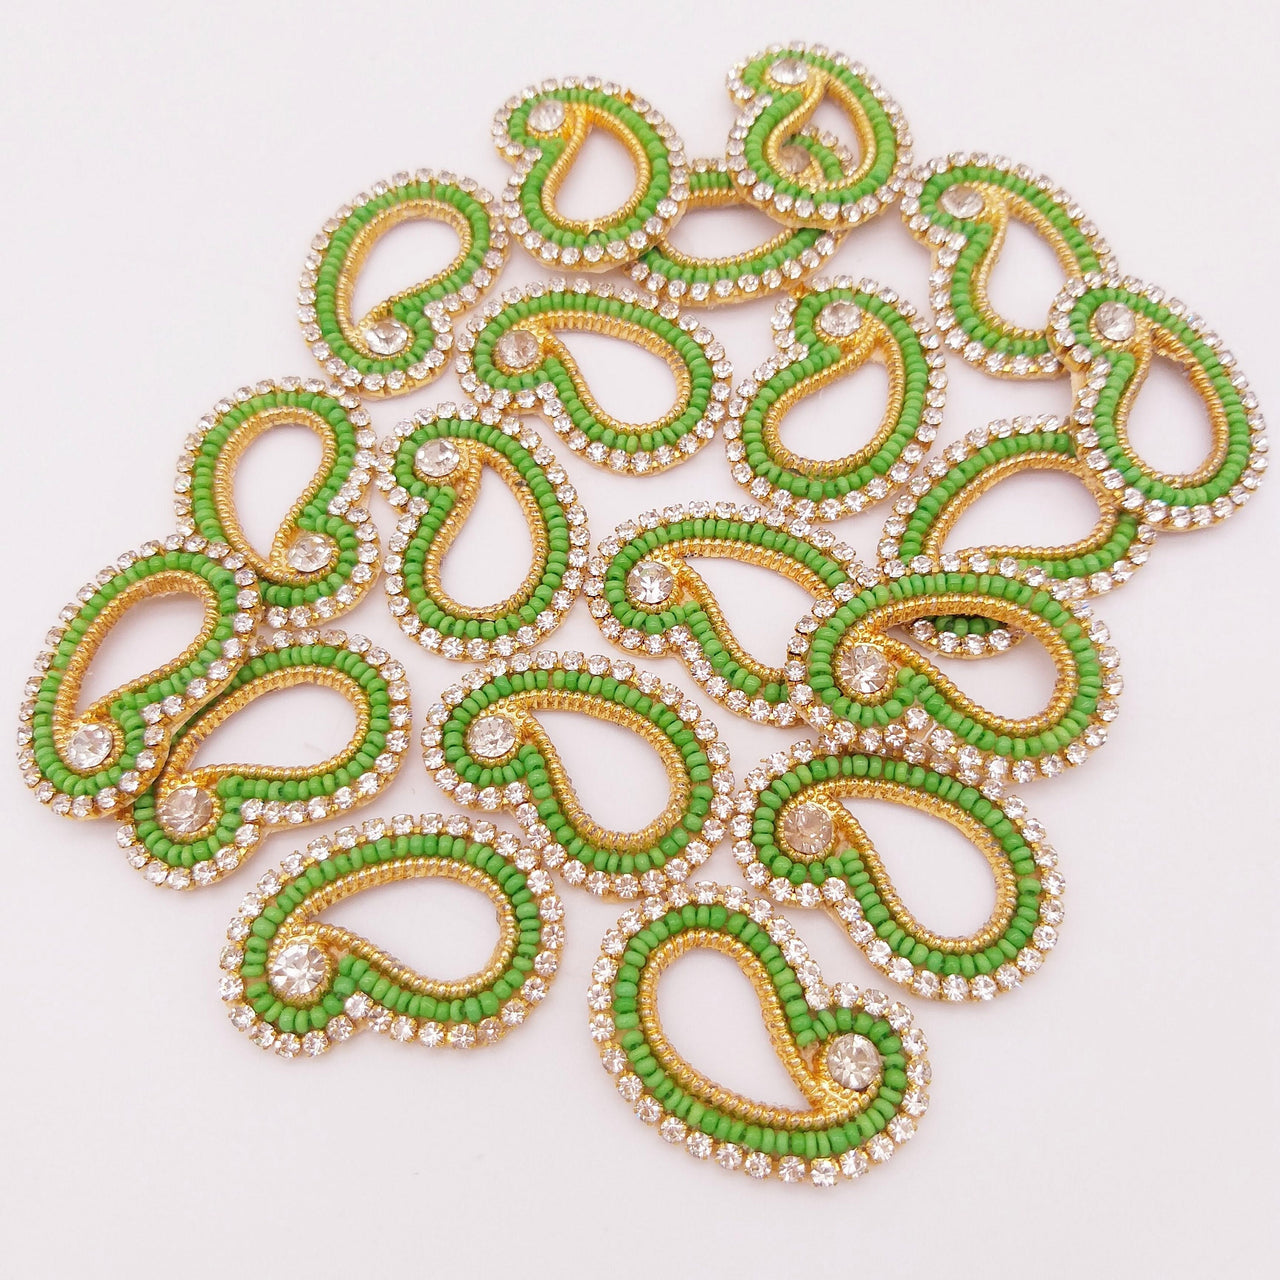 5 Paisley Appliques In Green Seed Beads and Rhinestones, Gold Tiny Paisley Appliques, Beaded Applique